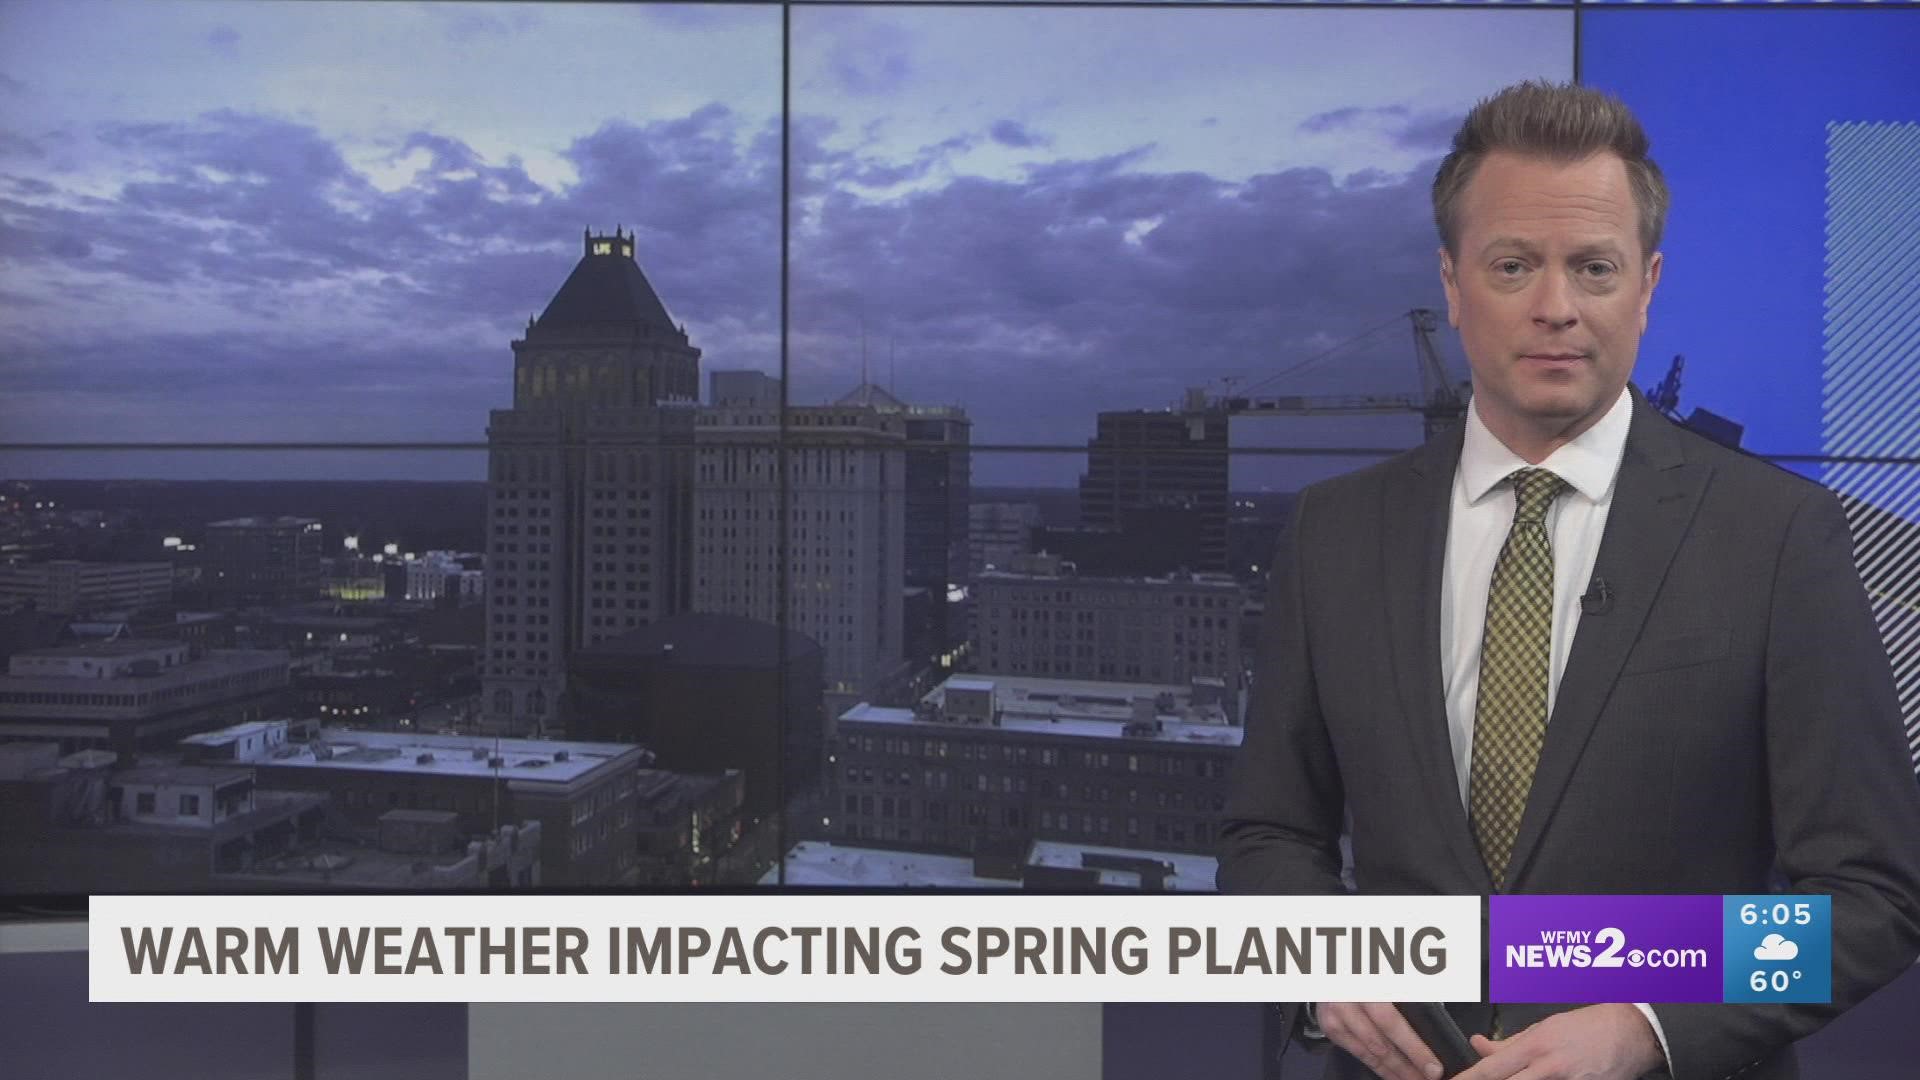 February has seen its fair share of warm days, but North Carolina gardening experts say you should wait to plant until at least April.